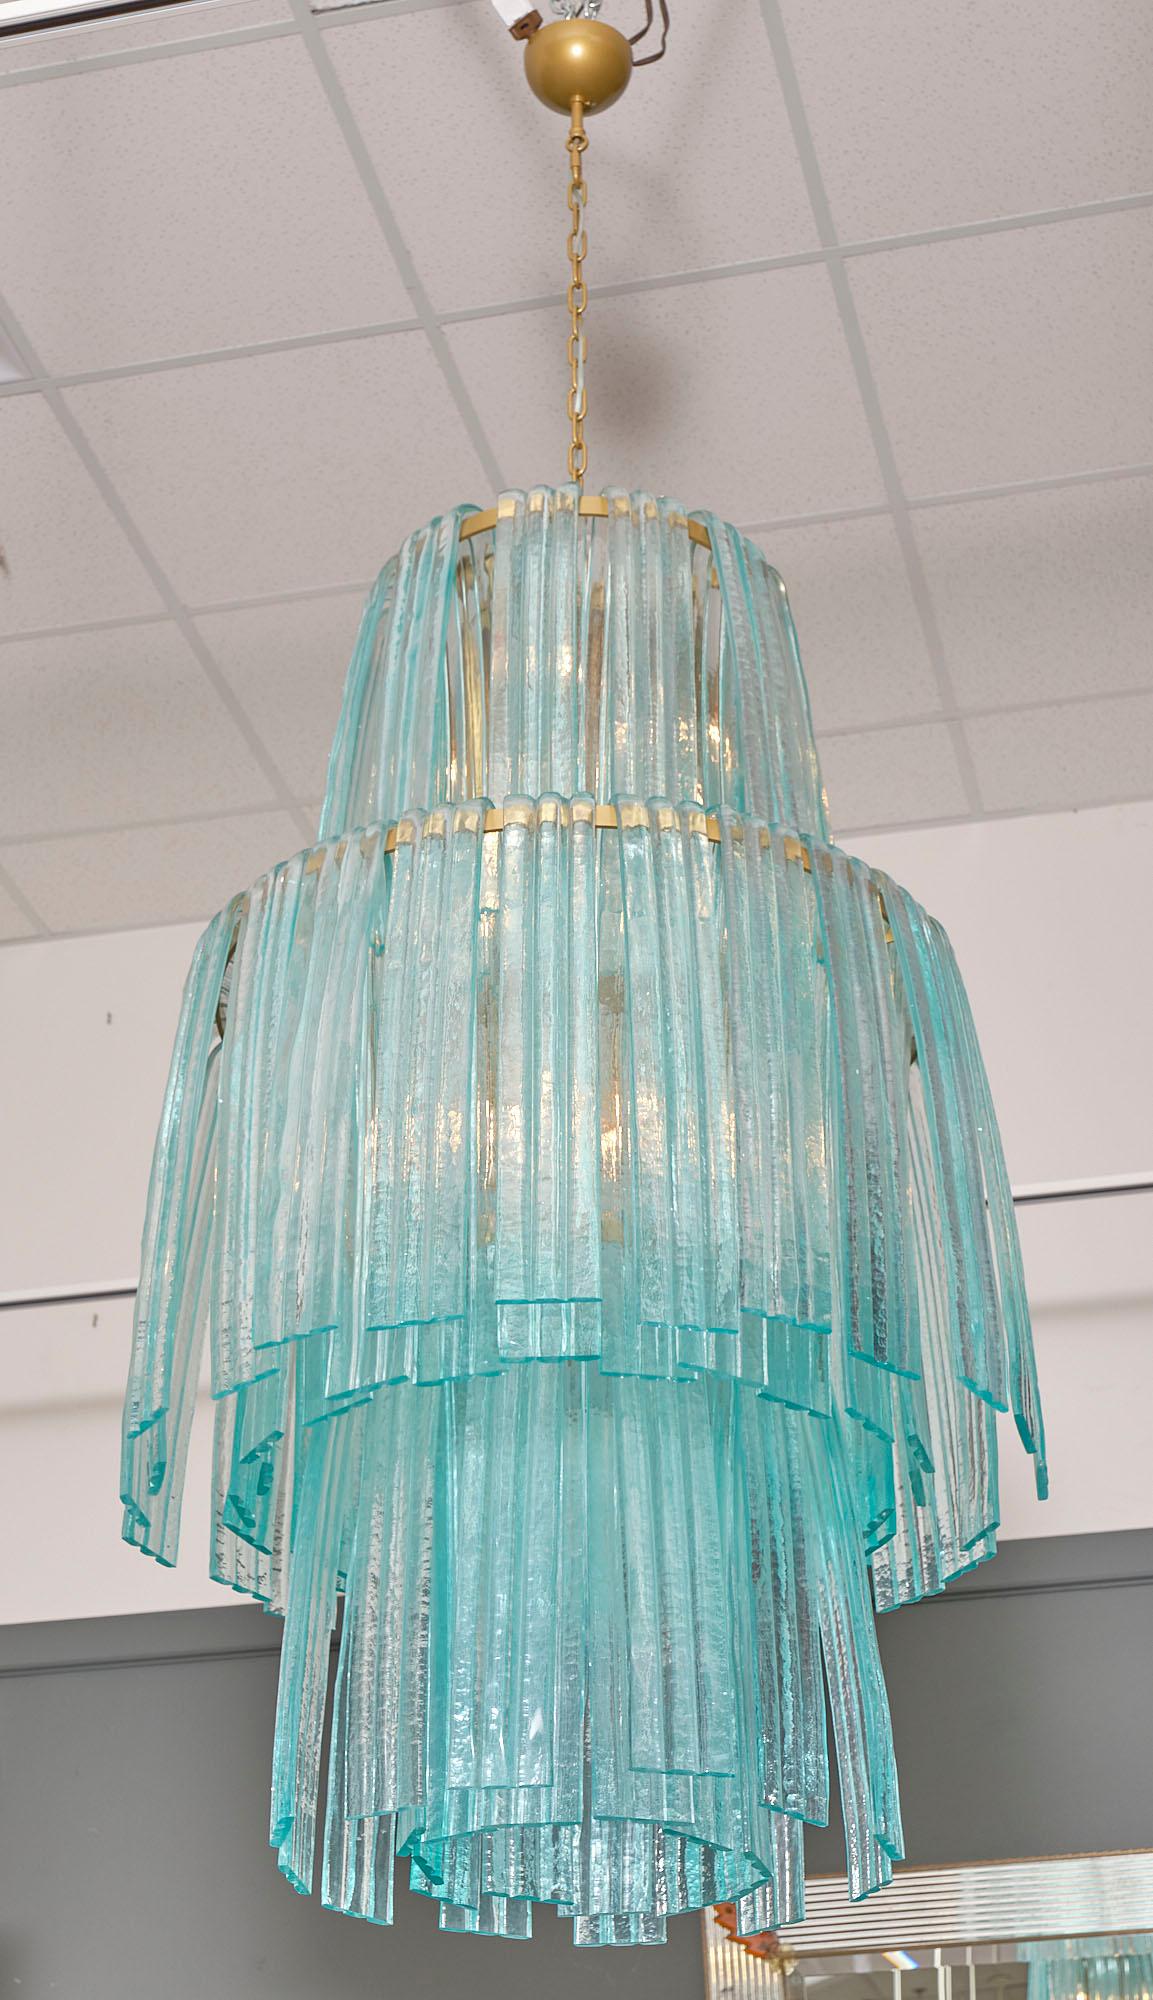 Murano glass “forcine” chandelier in an aquamarine blue. This Italian piece features hand-blown cascading glass components that are supported by a brass structure. This fixture has been newly wired to US standards.

This chandelier is currently